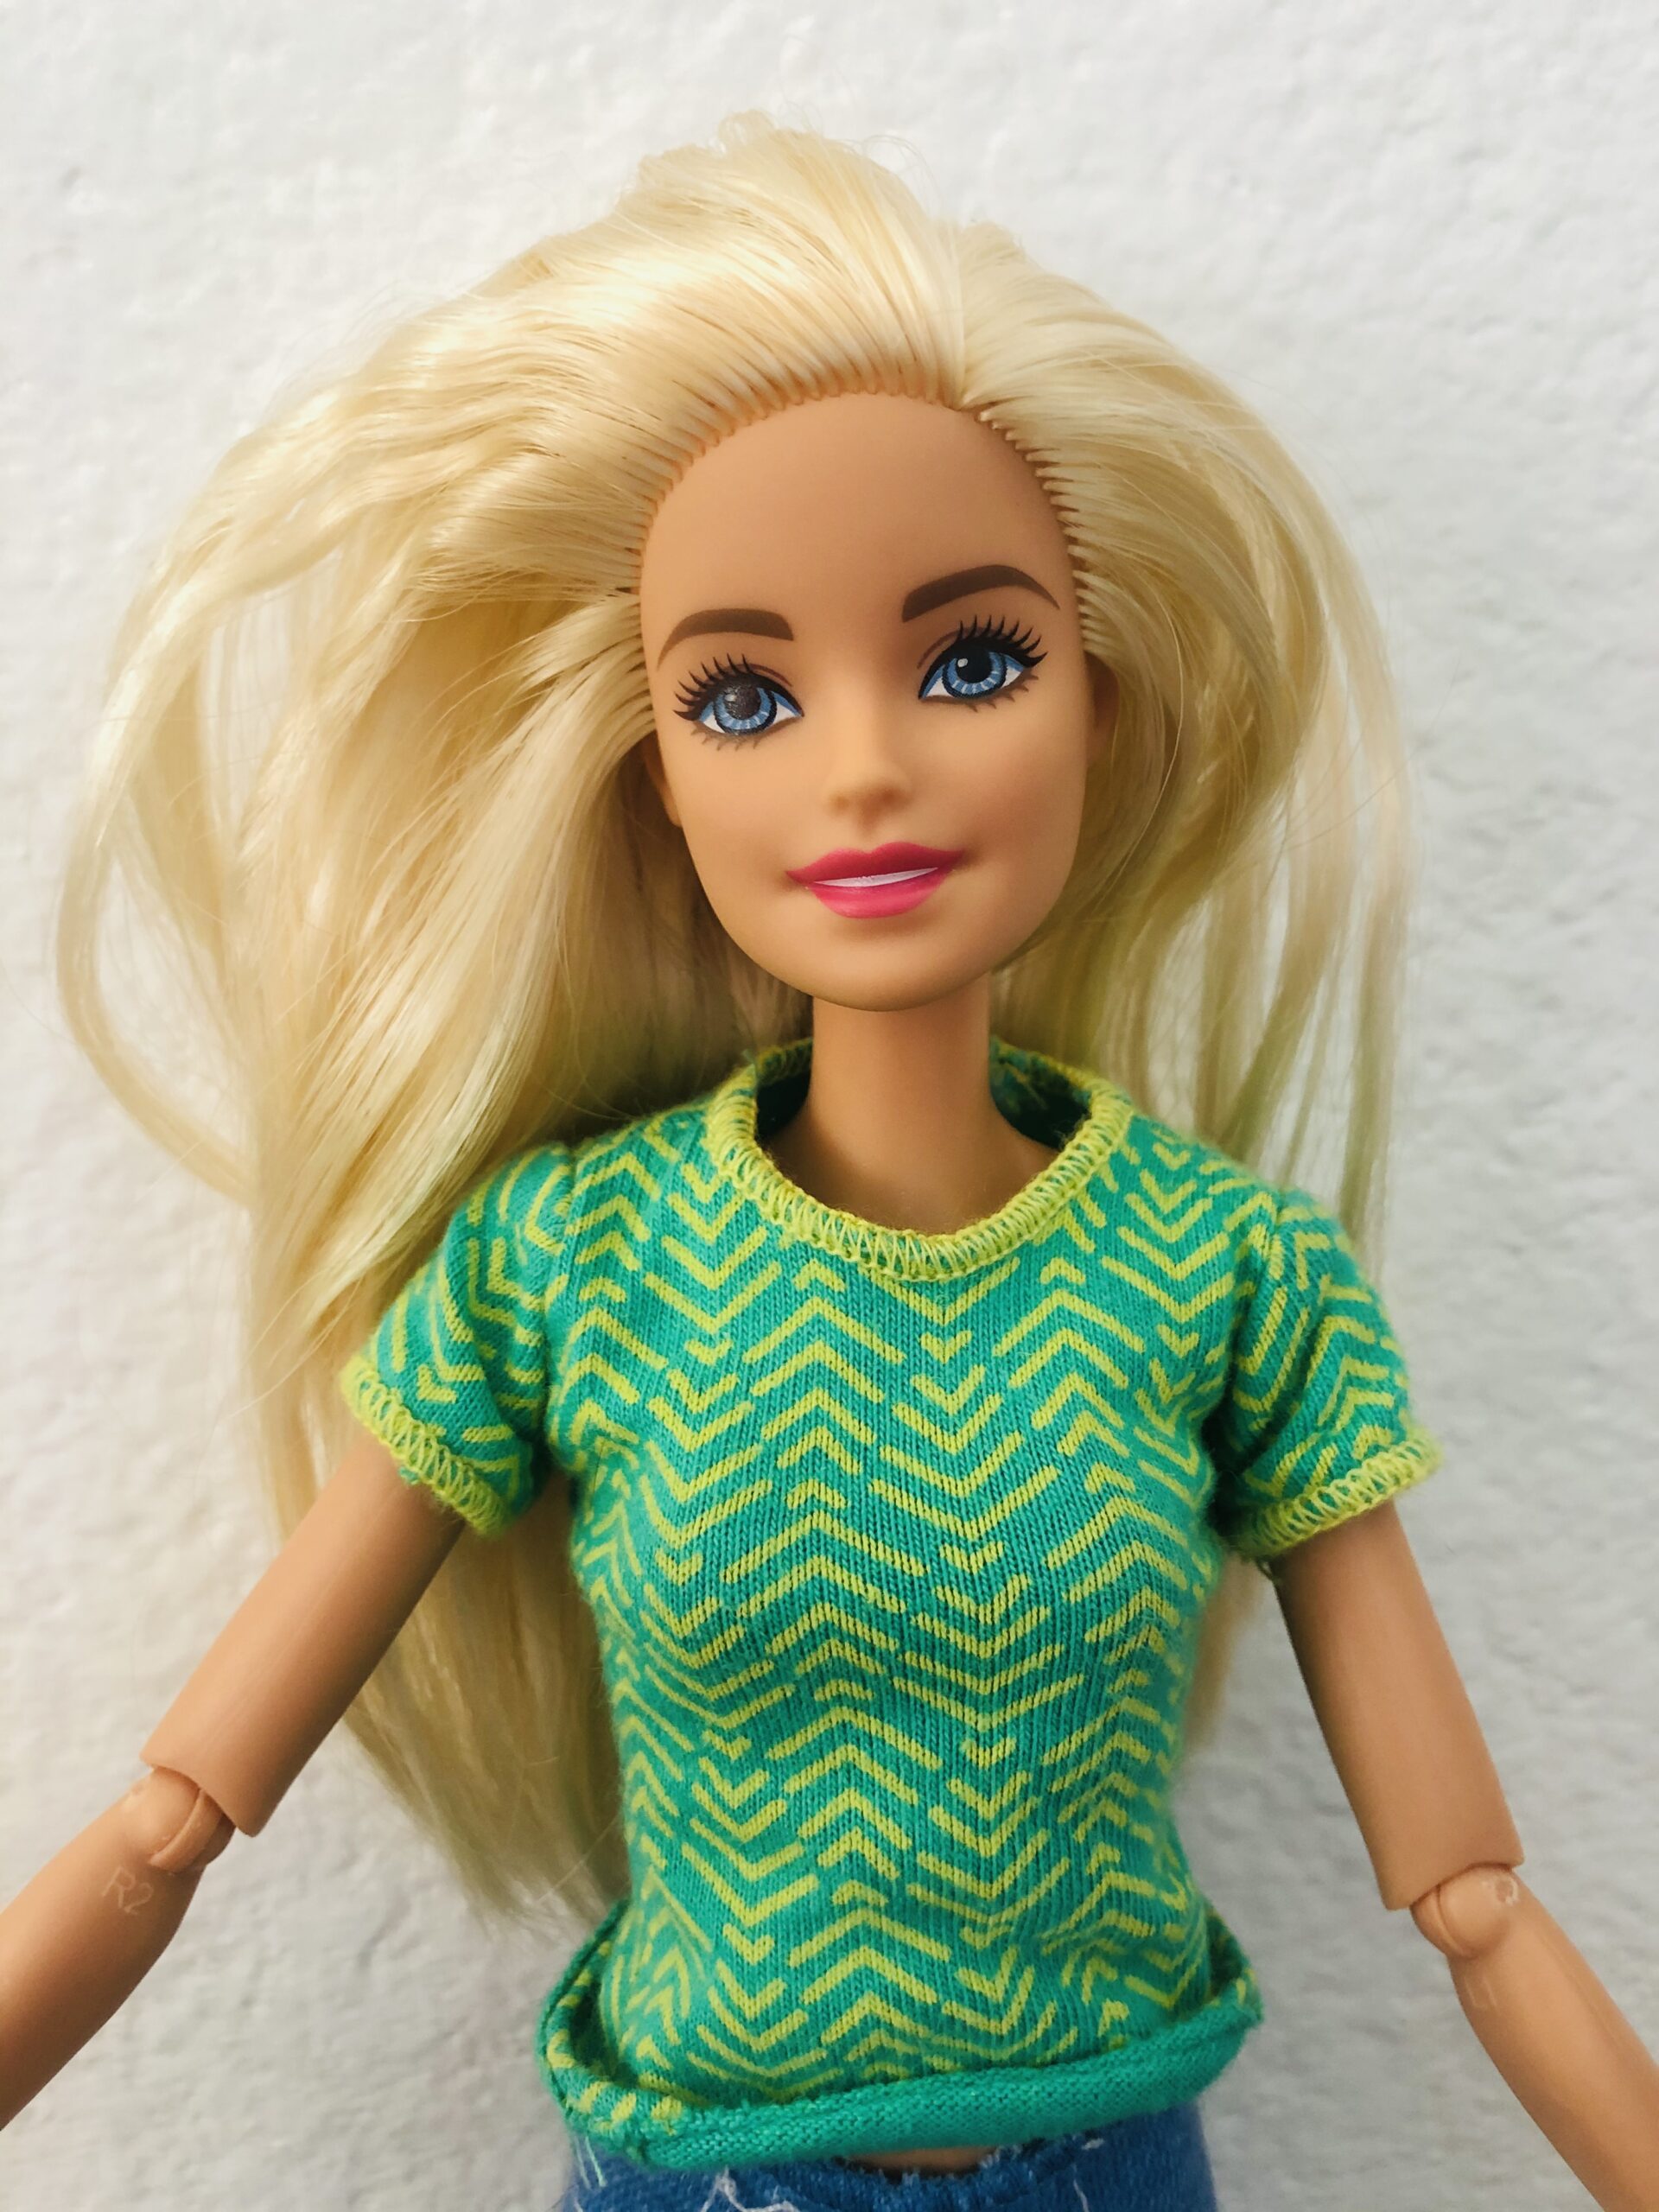 A Barbie wearing a lime green and yellow shirt.